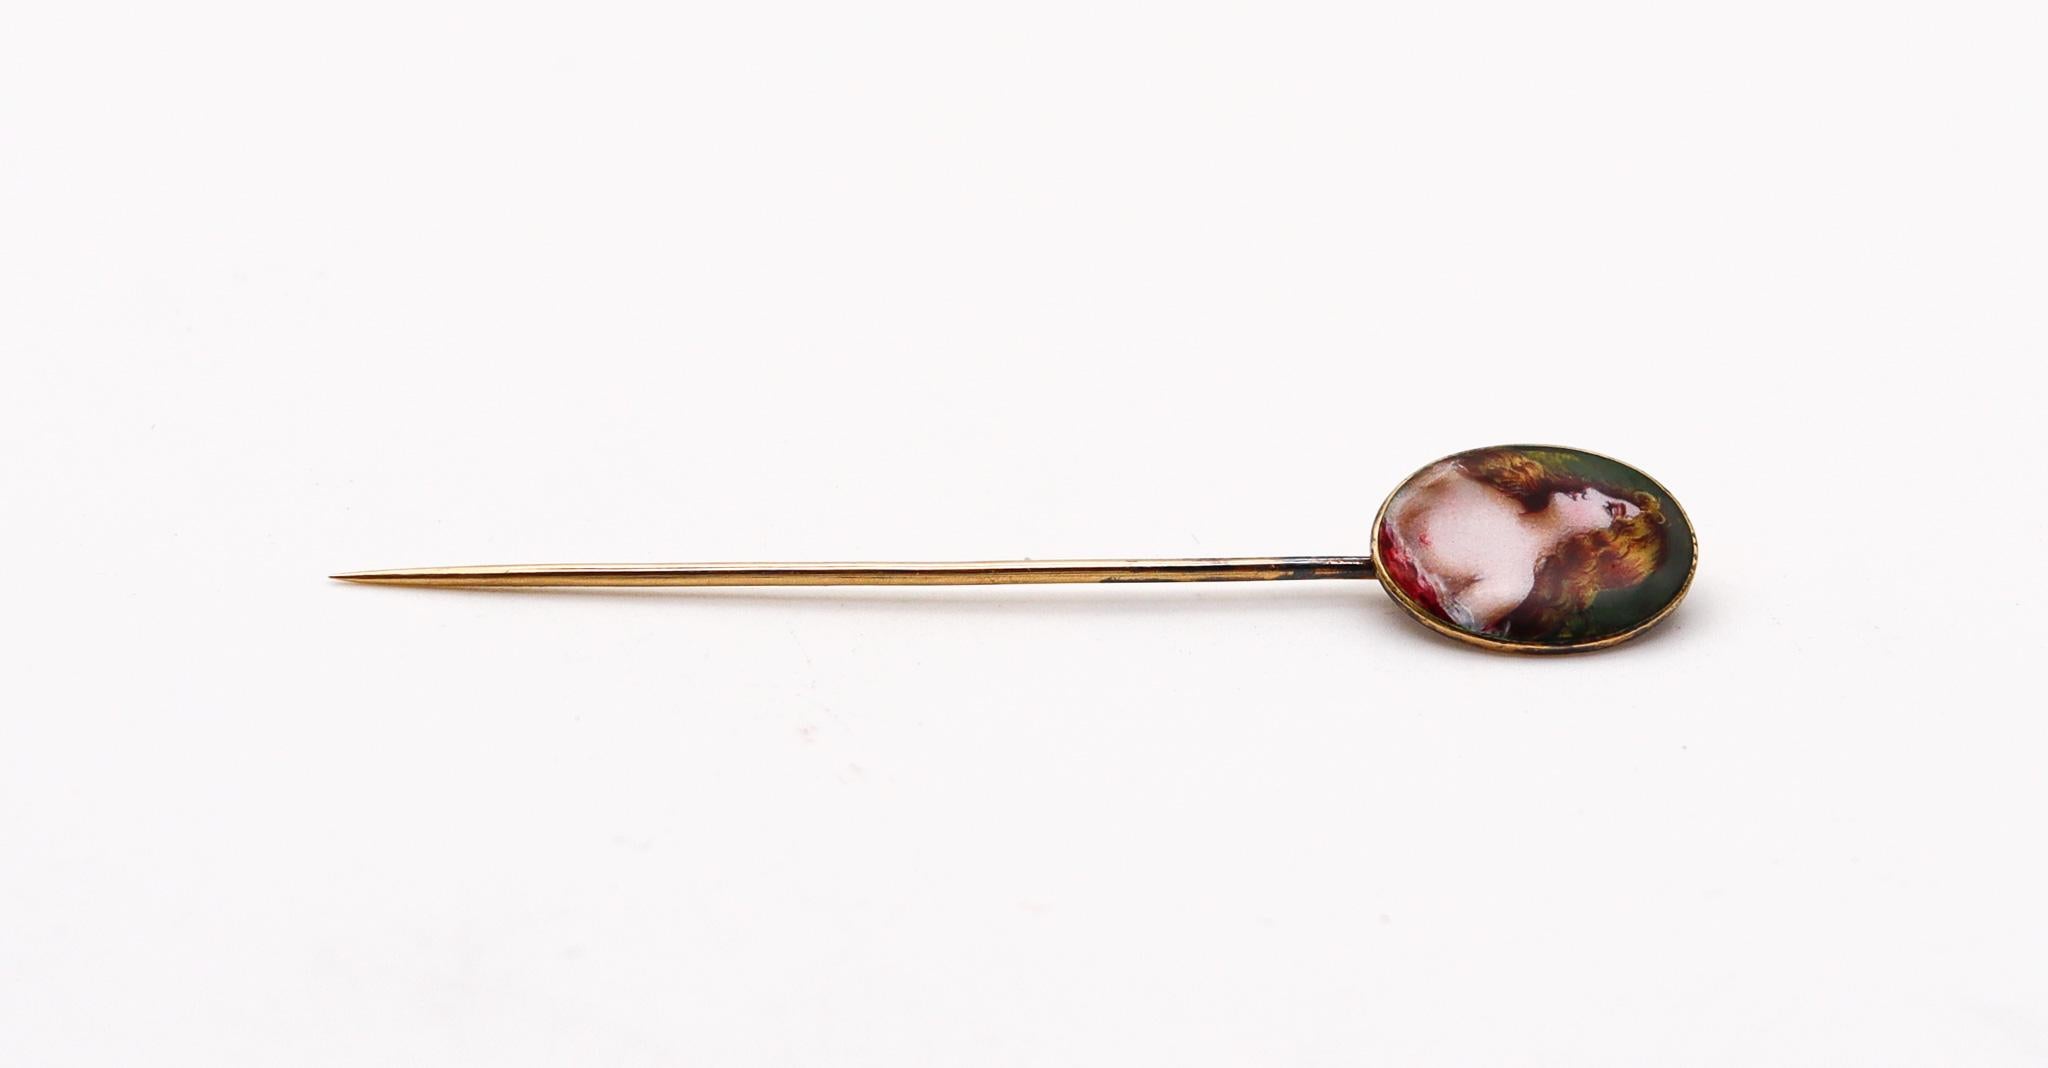 Meyle & Mayer 1900 Art Nouveau Enamel Stick Pin In 18Kt Yellow Gold In Excellent Condition For Sale In Miami, FL